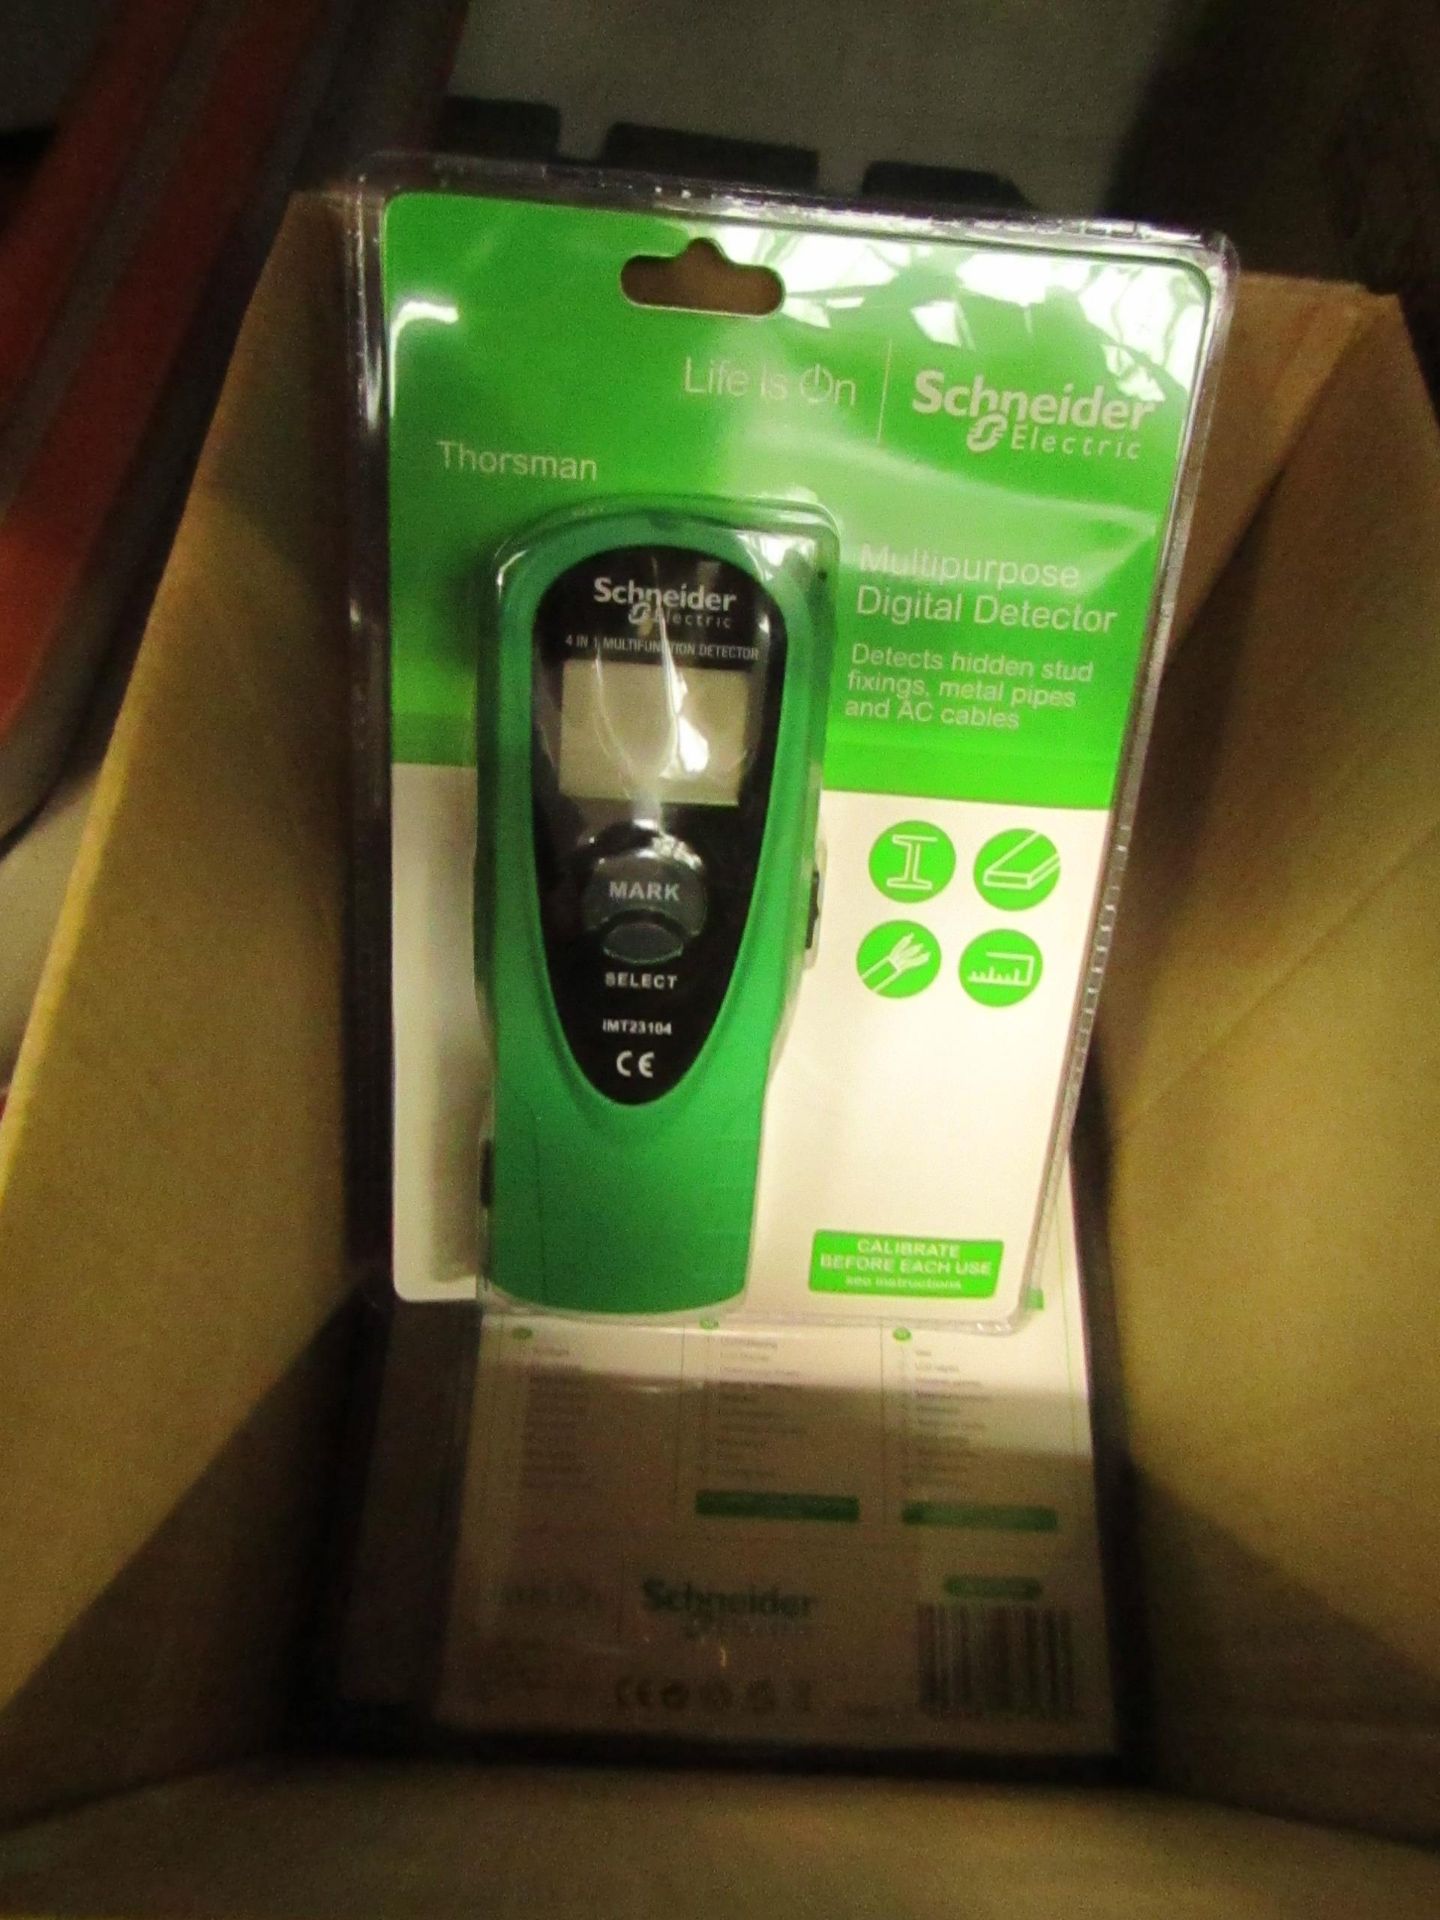 Schneider Electric multi-purpose digital detector, new and packaged.